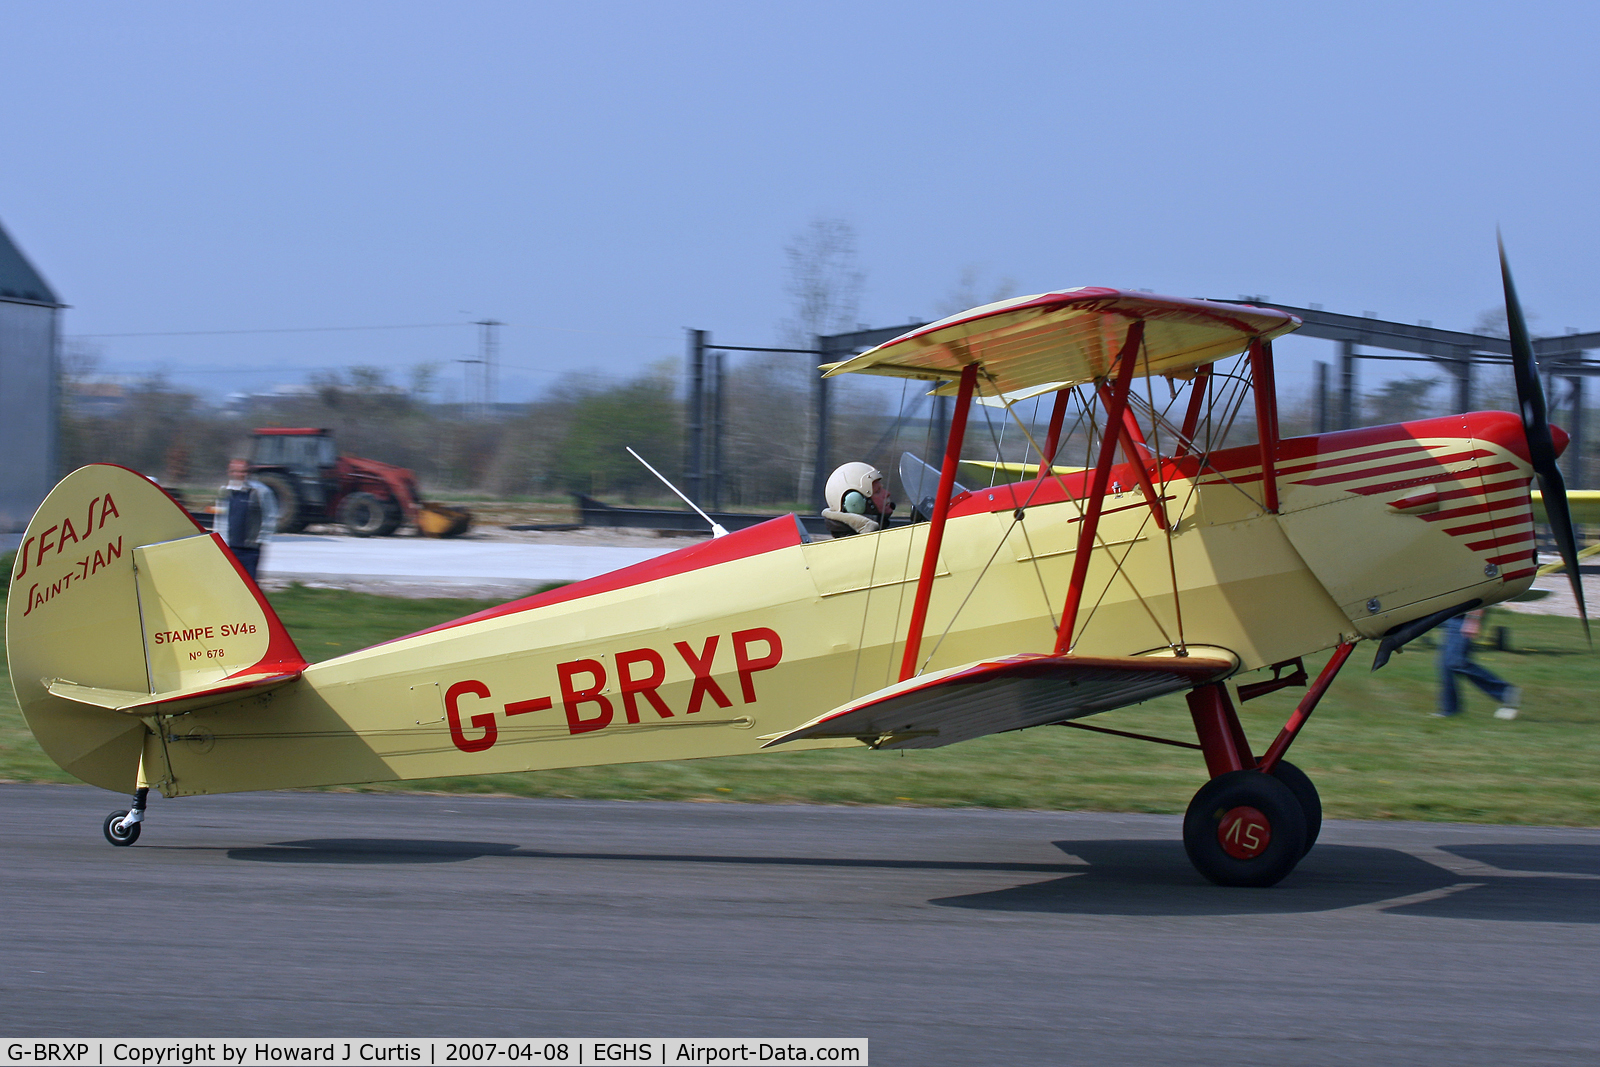 G-BRXP, 1948 Stampe-Vertongen SV-4C C/N 678, At the PFA fly-in. Privately owned.